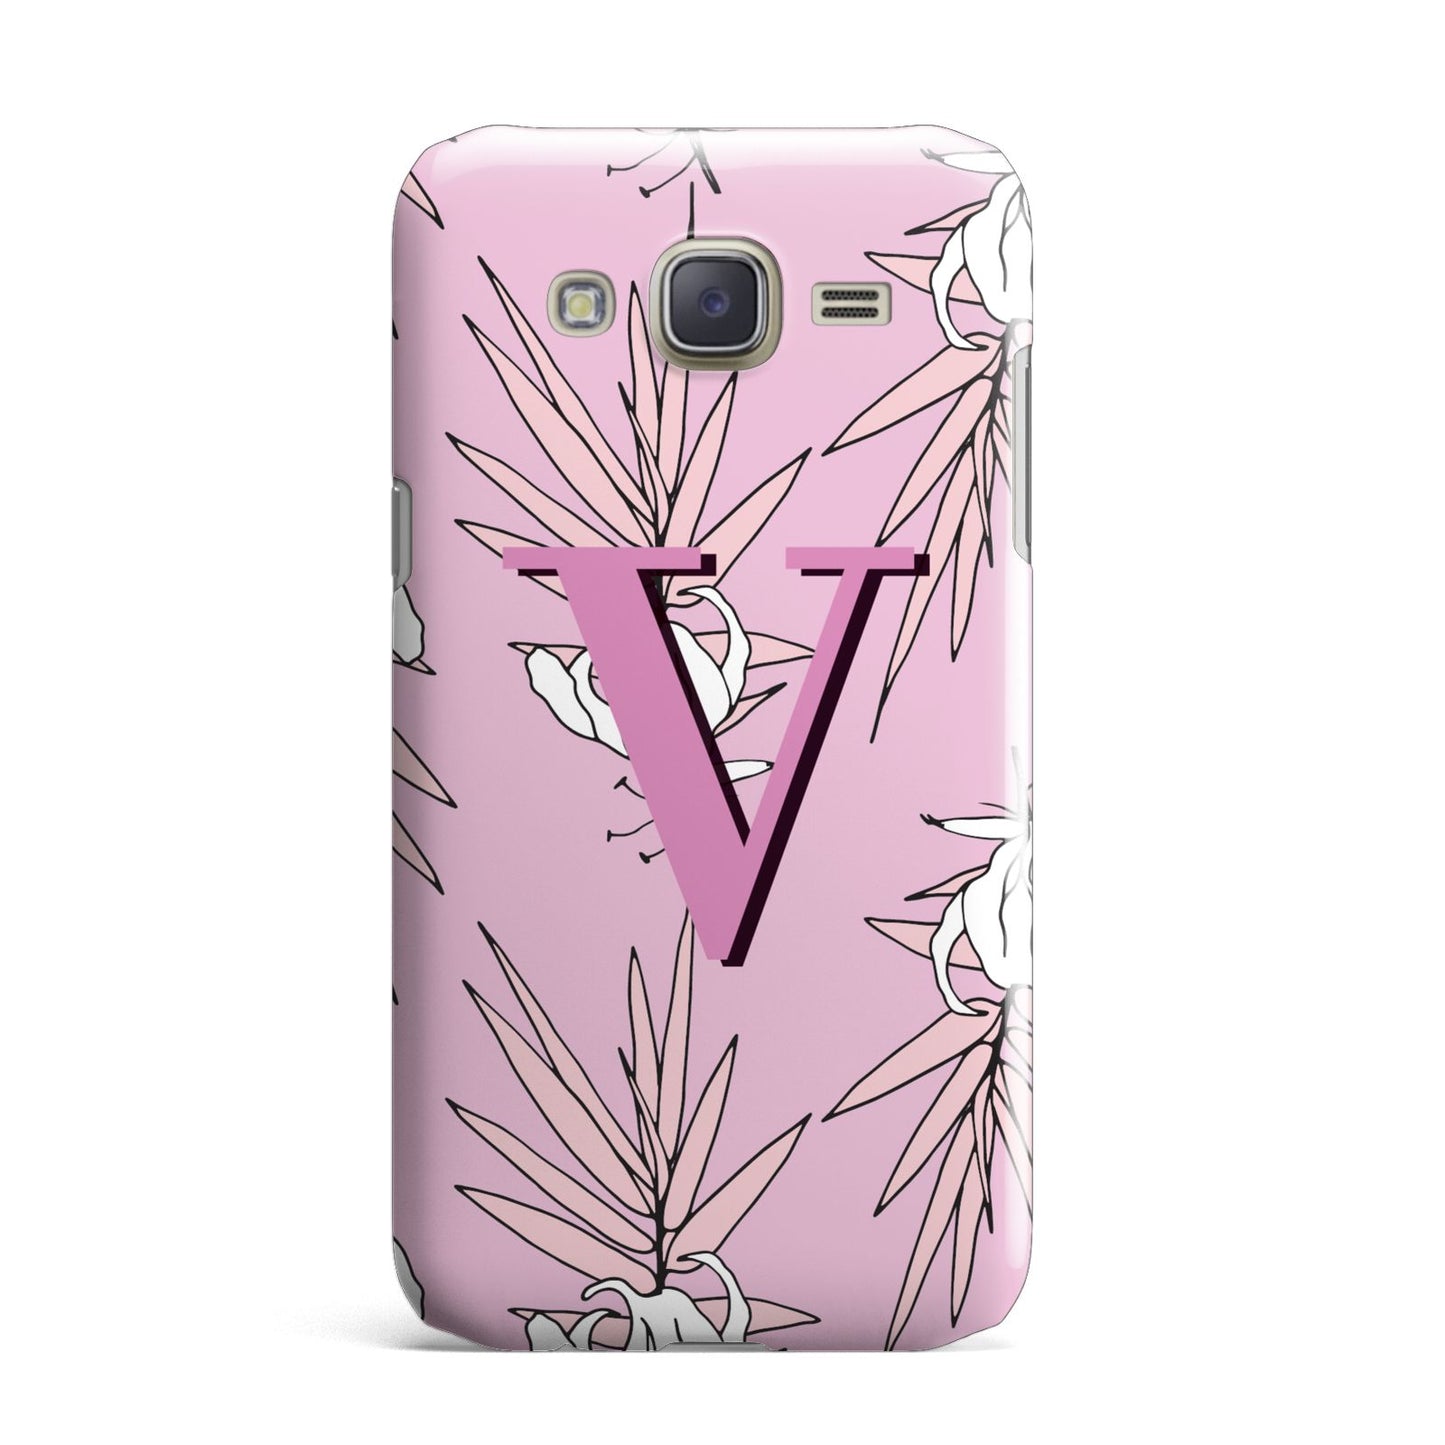 Personalised Pink and White Floral Monogram Samsung Galaxy J7 Case